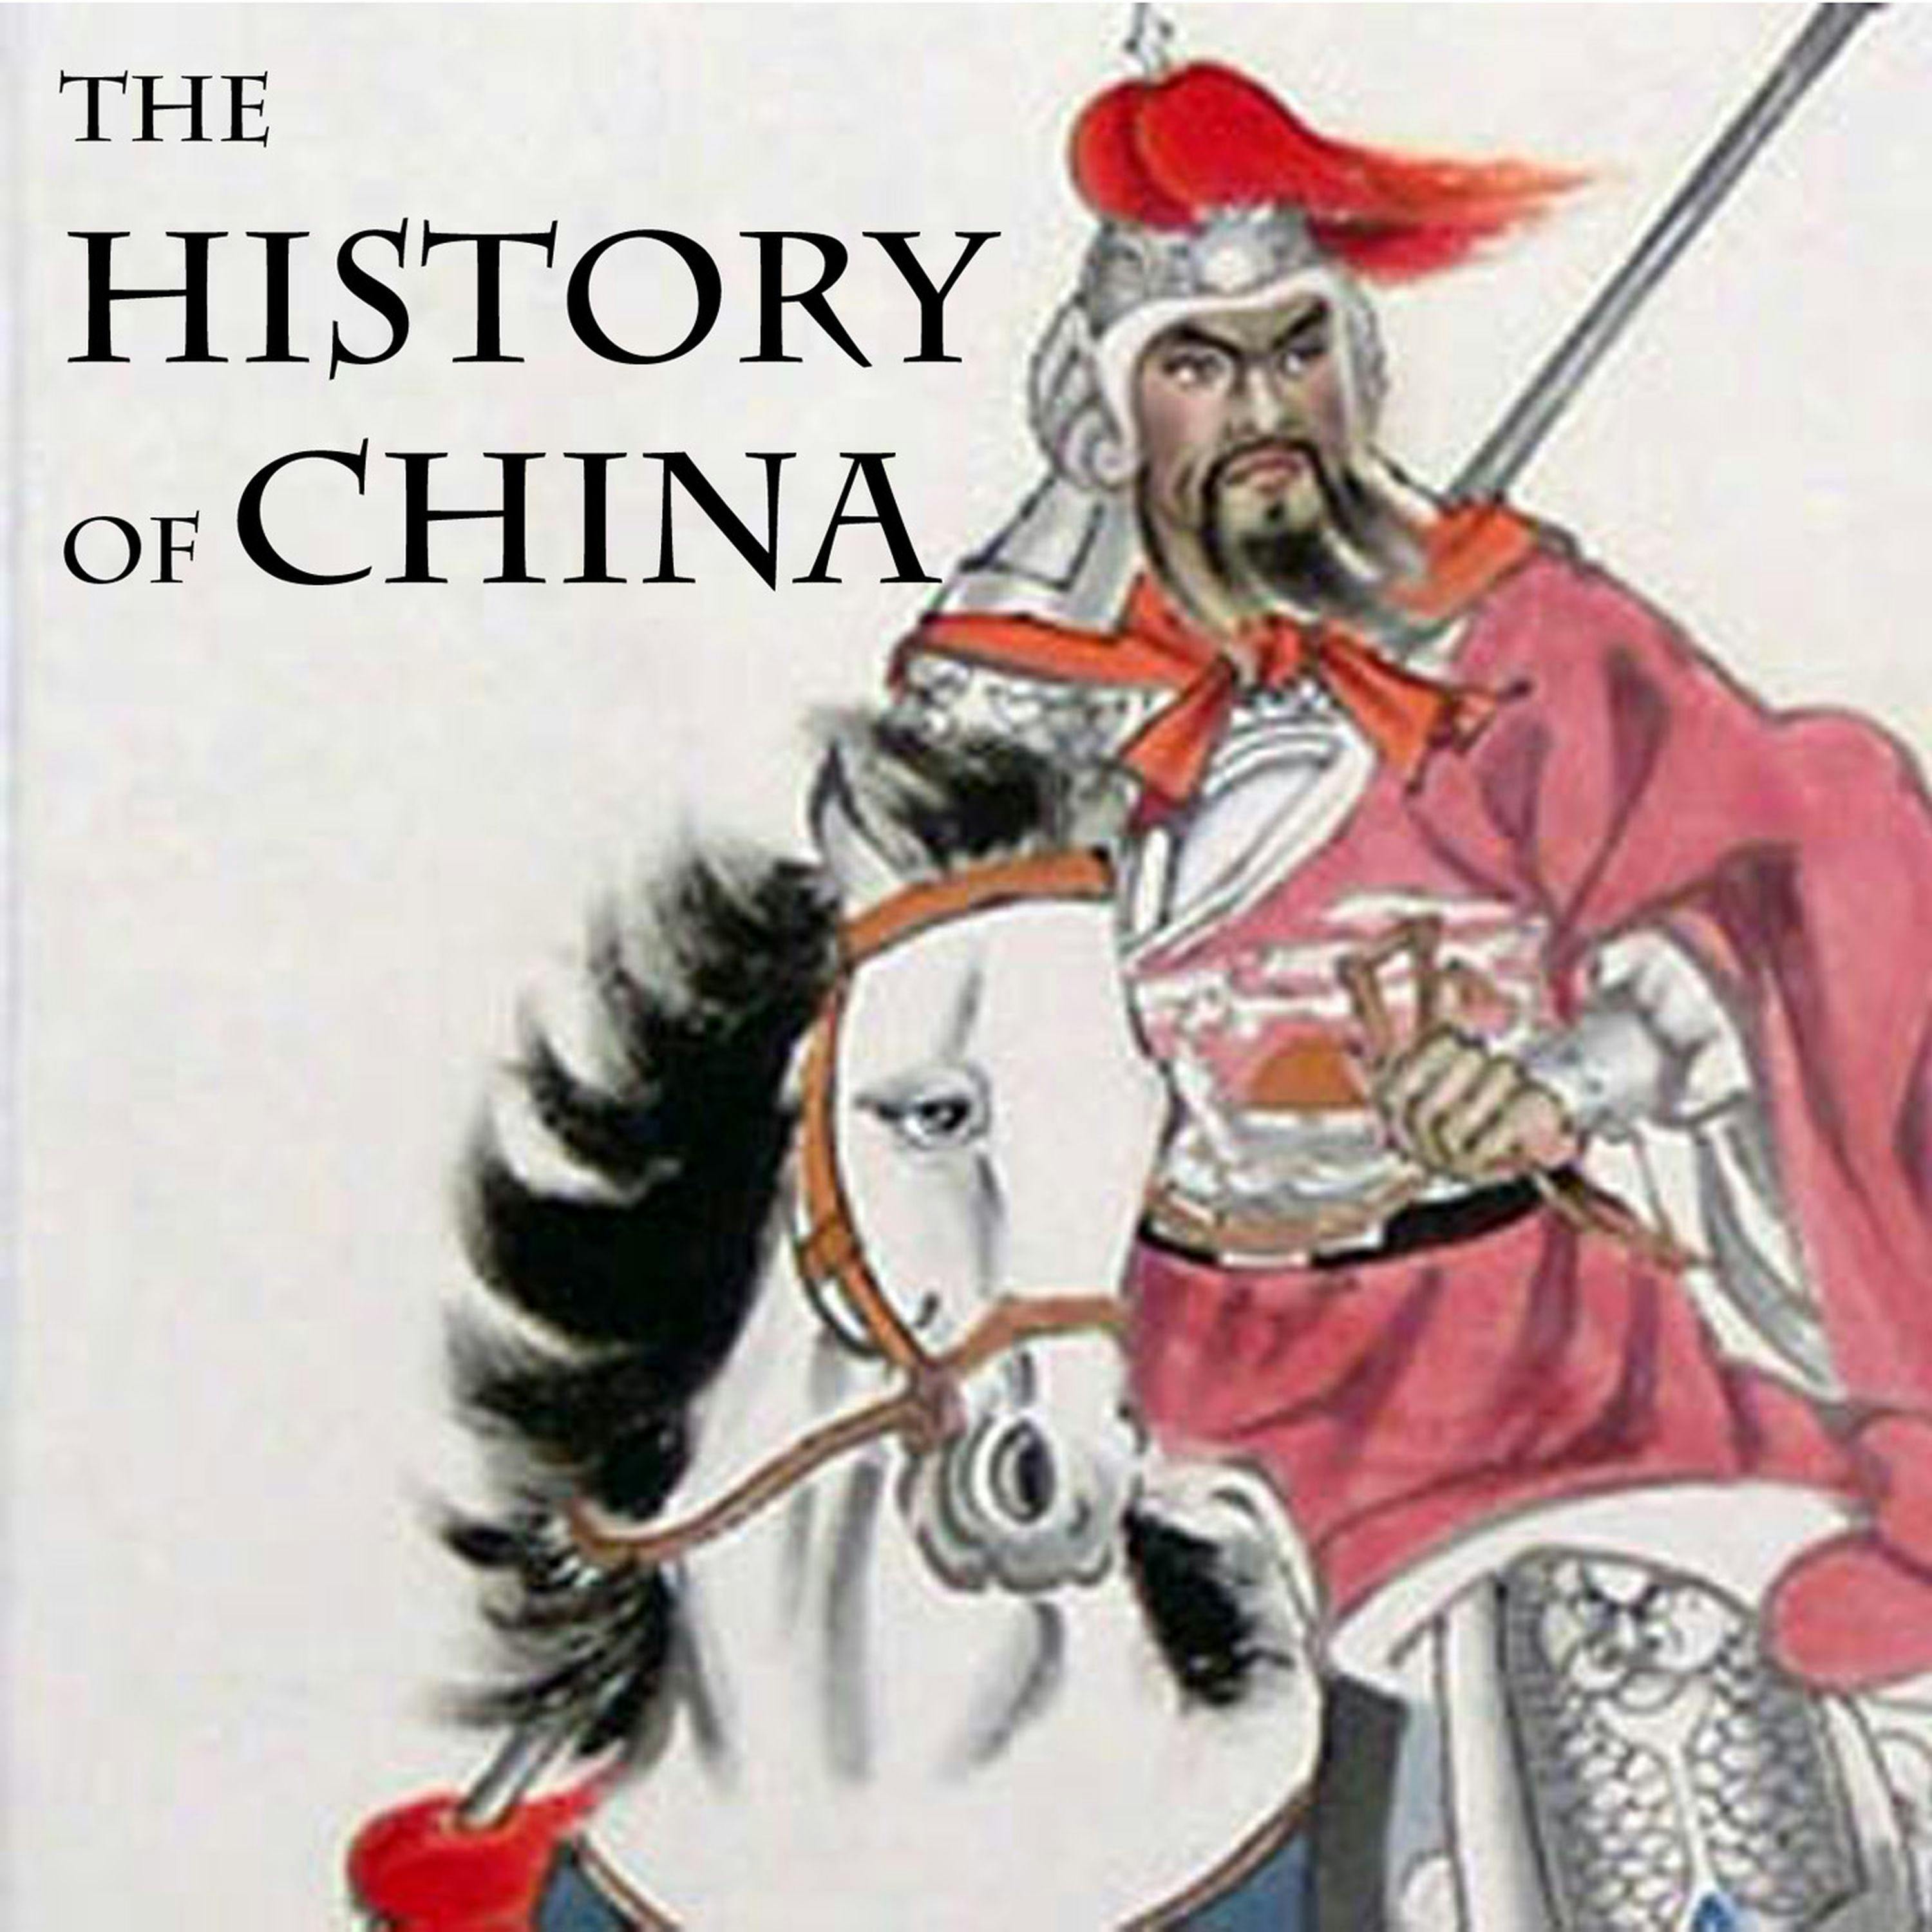 #3 - Xia 1: The Xia, China’s First Dynasty